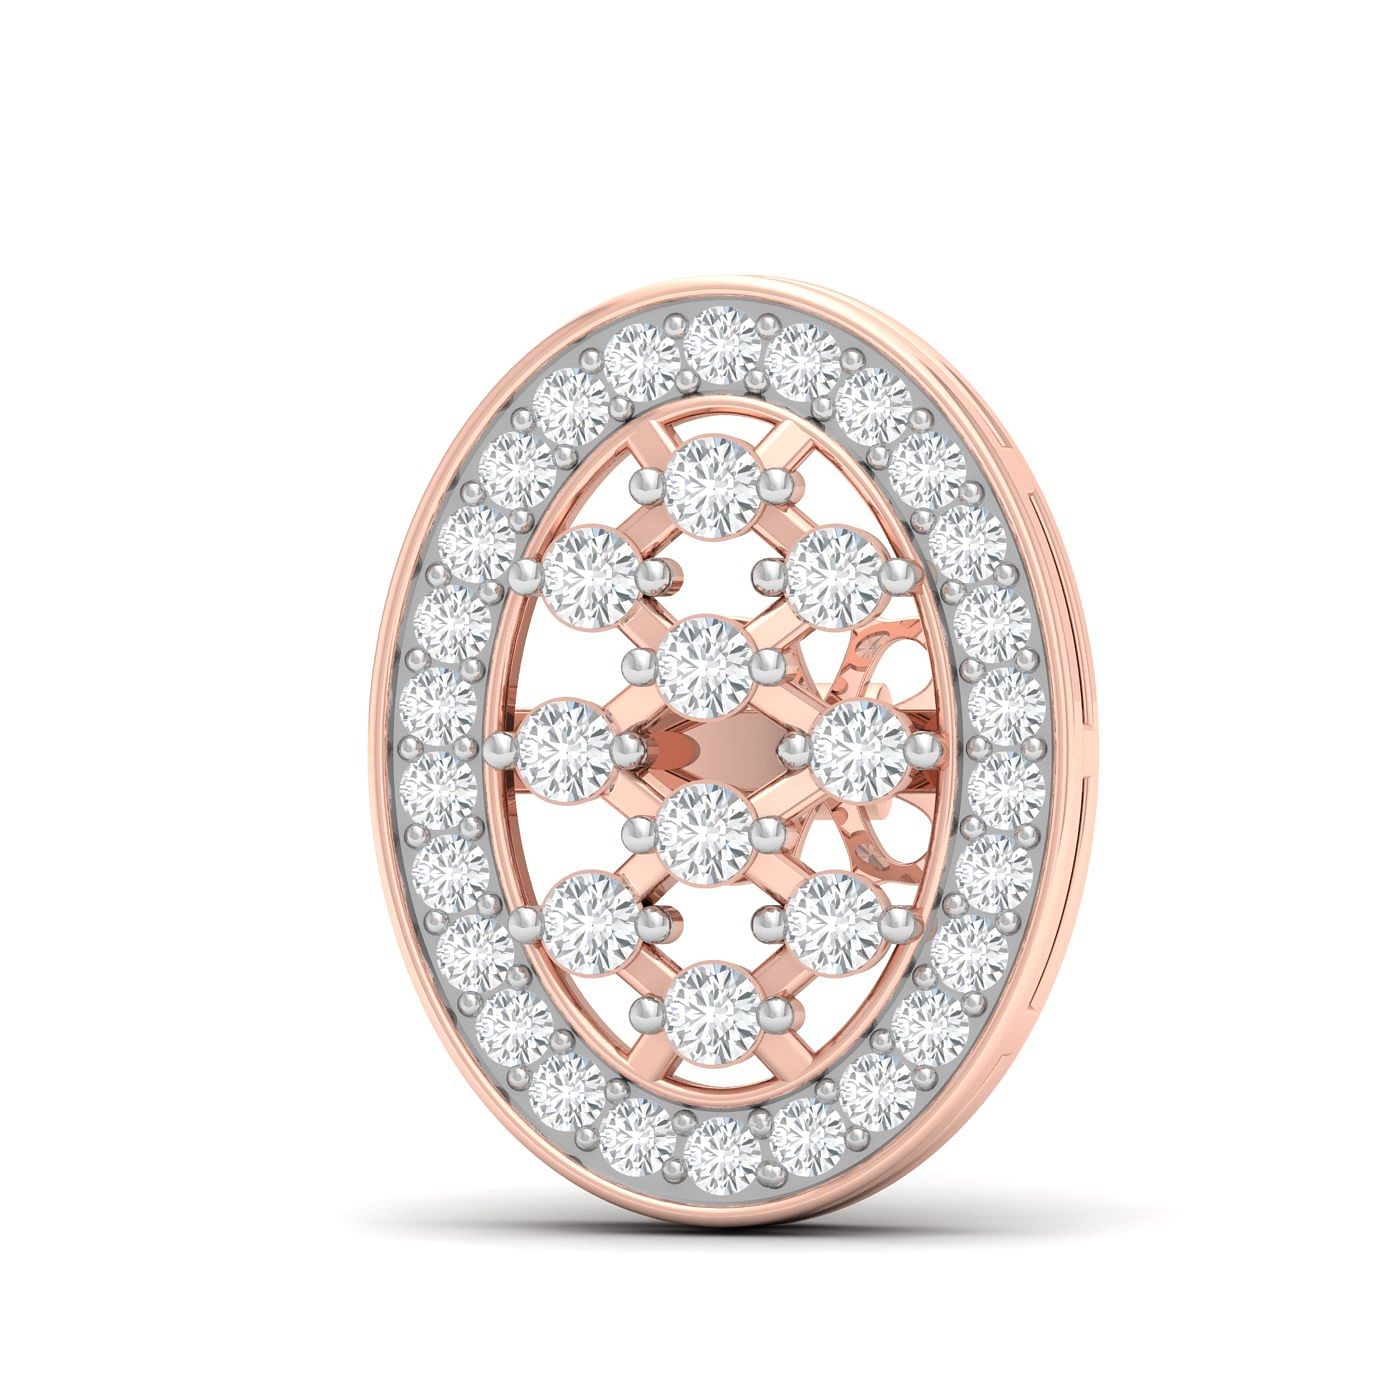 Round Oval Rose Gold Diamond Earring